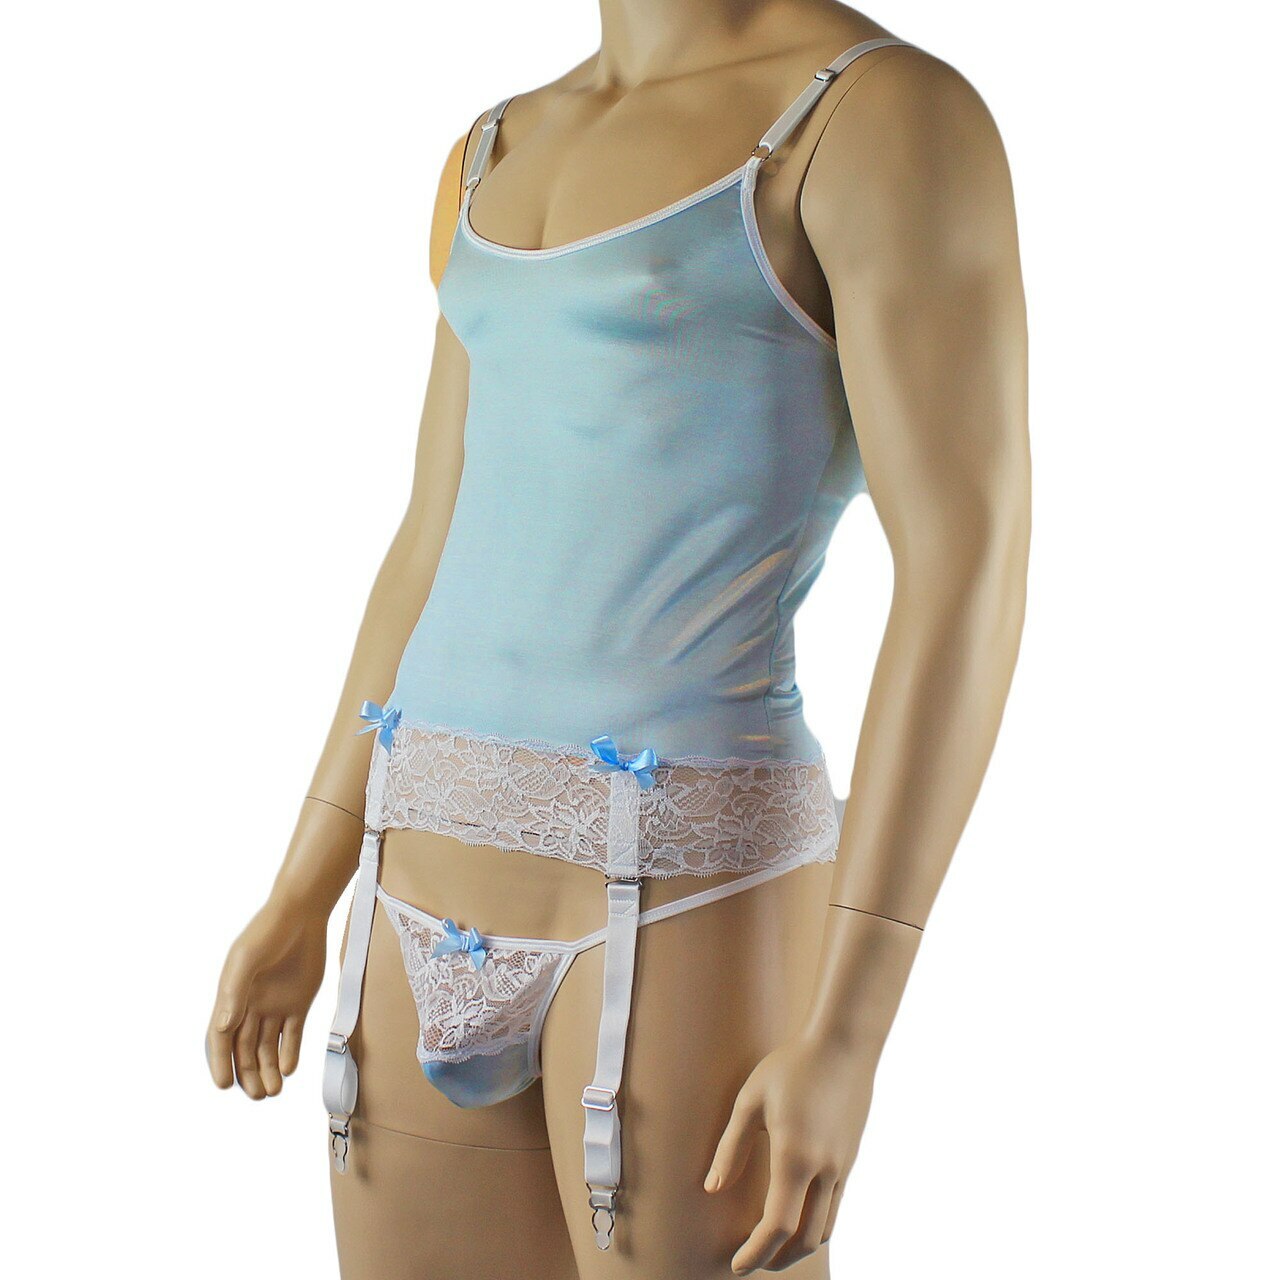 Mens Joanne Camisole Bustier Garter Top with Pouch G string - Sizes up to 3XL Light Blue and White Lace